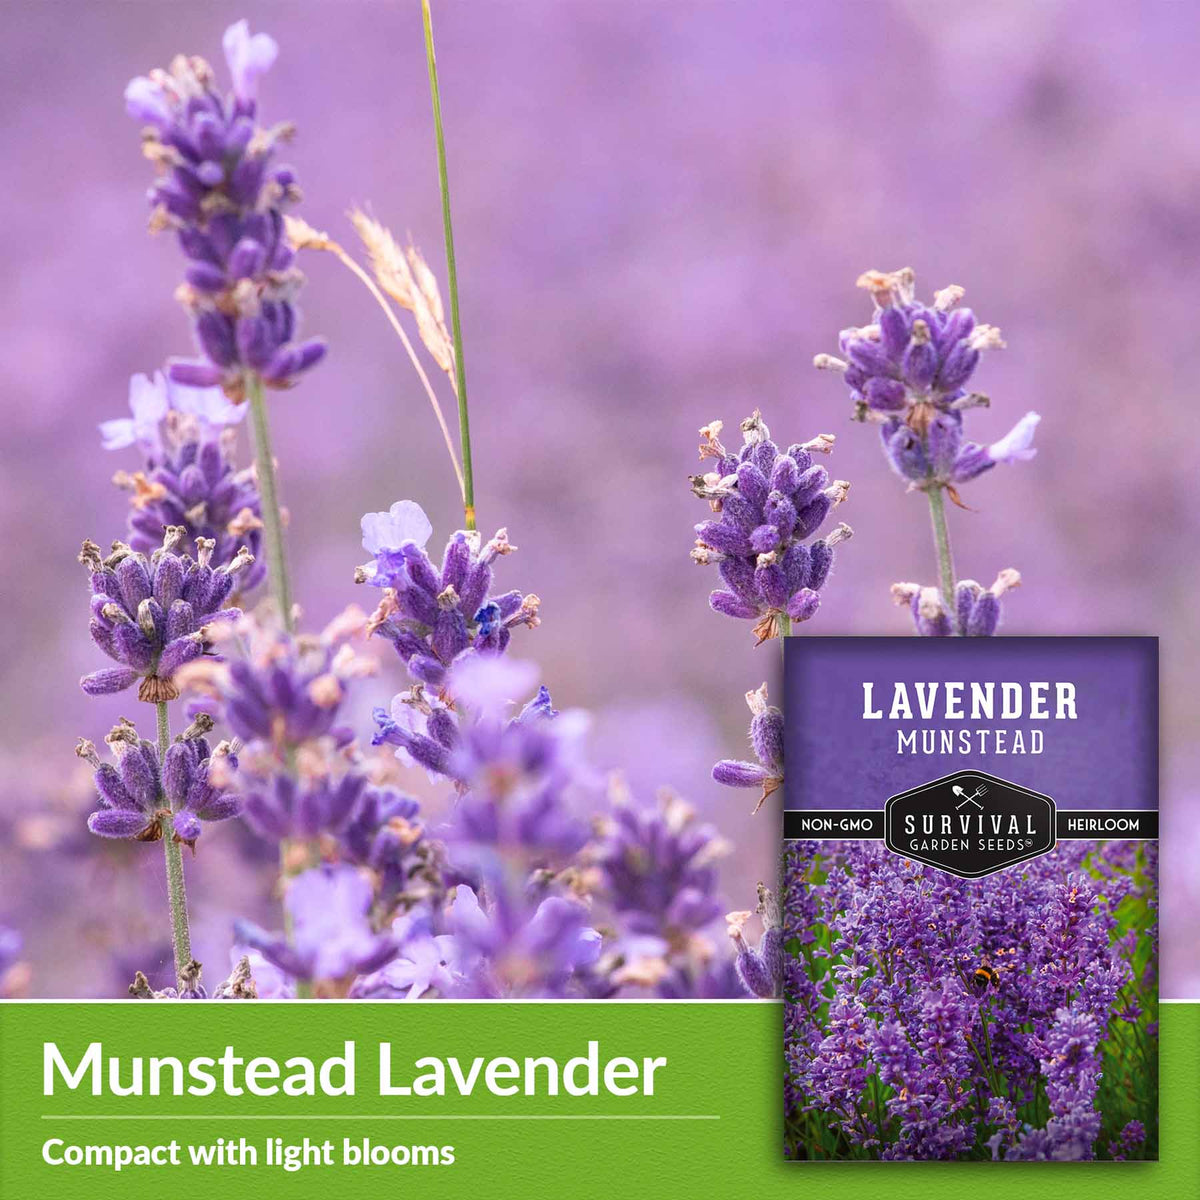 Munstead Lavender, compact with light blooms